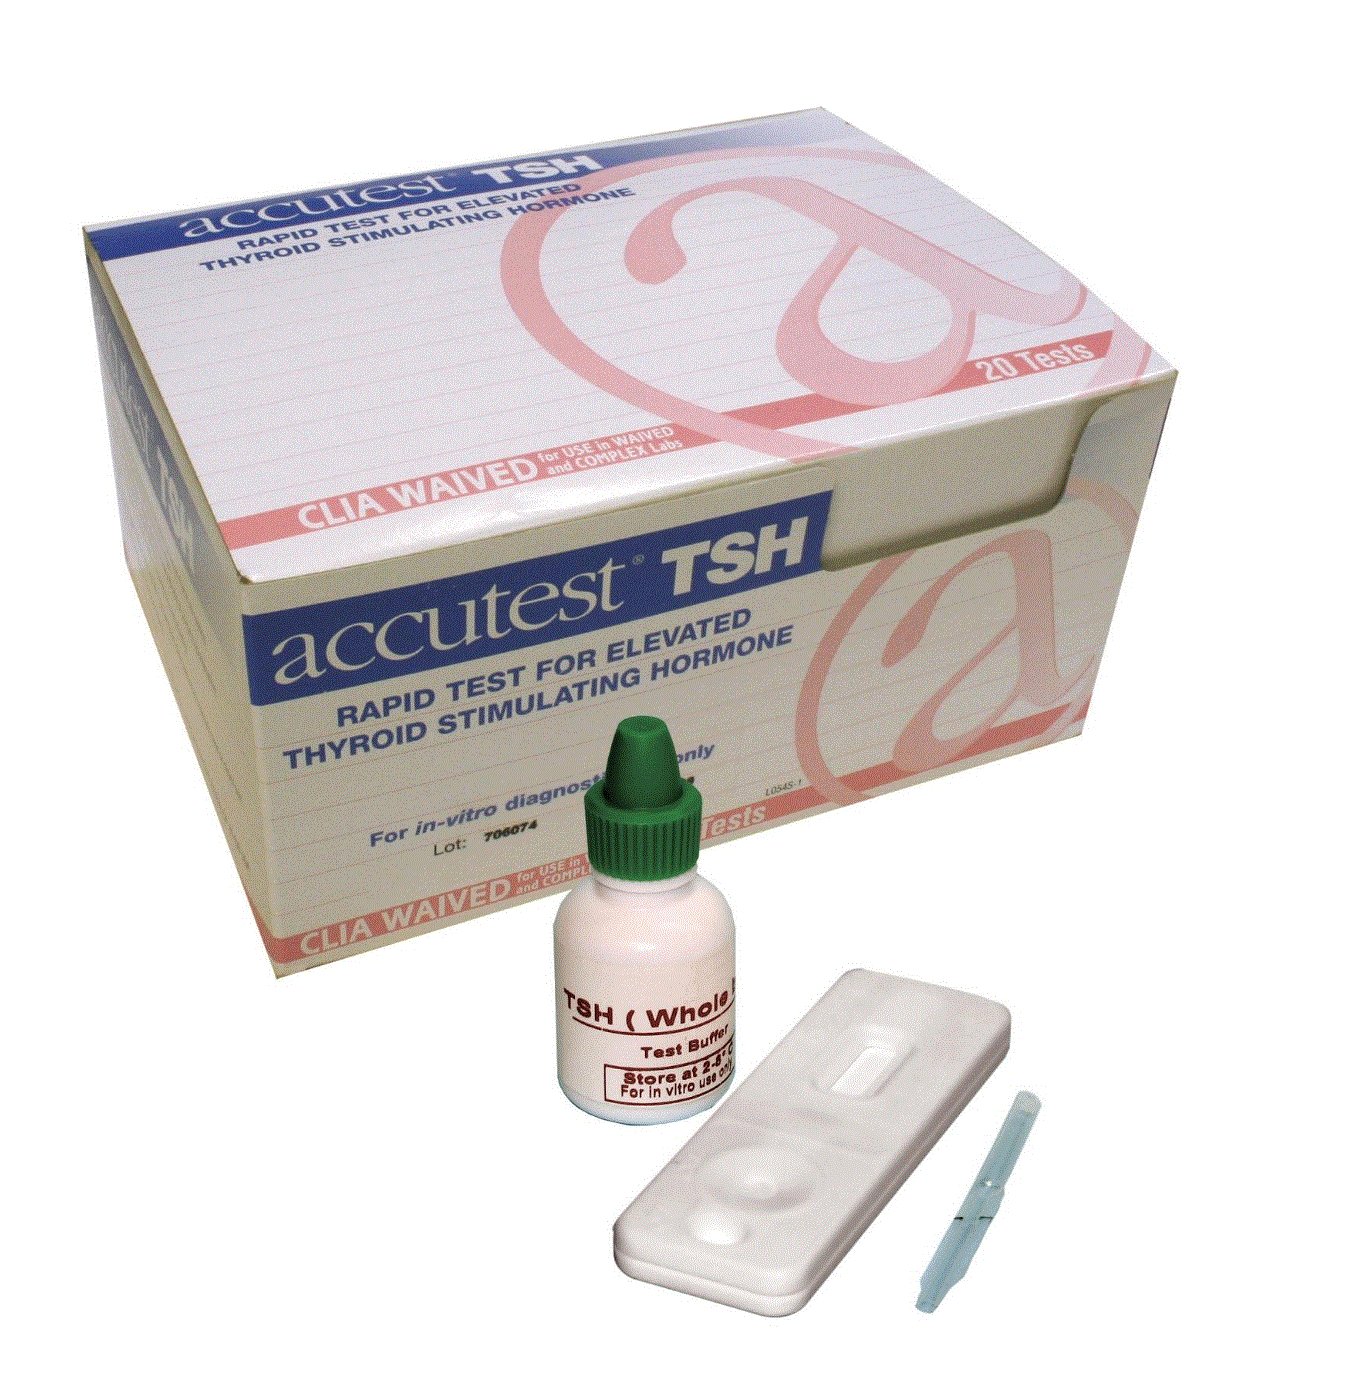 TSH Blood Tests Products, Supplies and Equipment